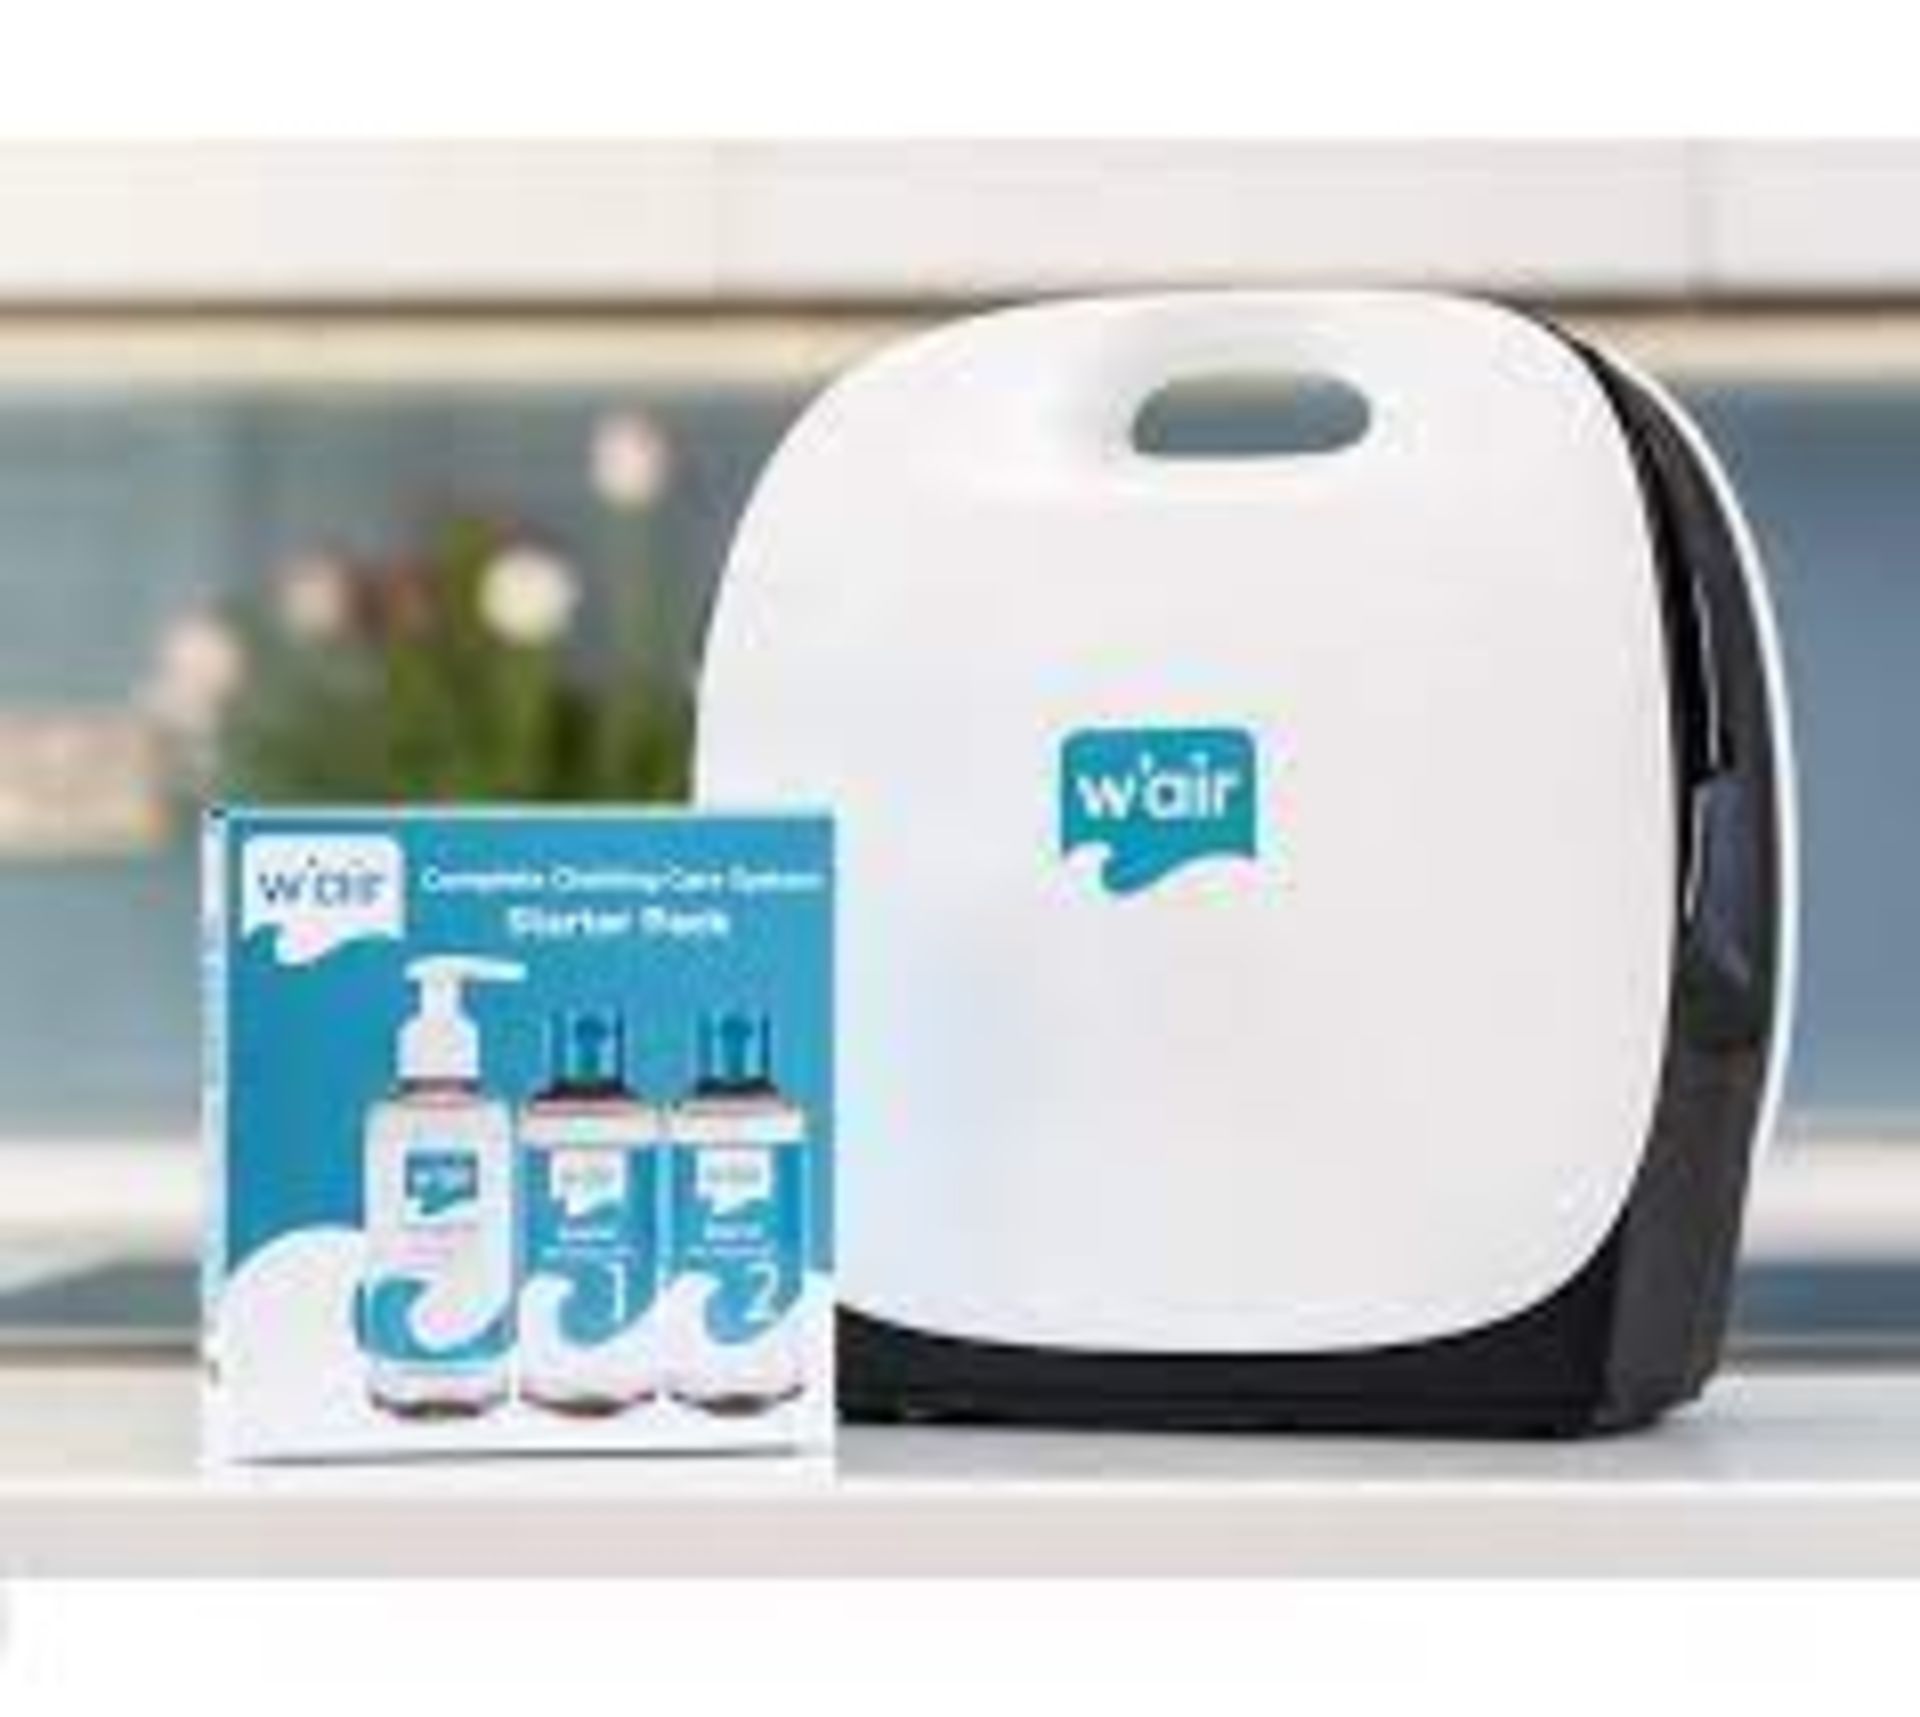 BRAND NEW W'AIR SNEAKER CLEANING SYSTEMS RRP £299, The w'air uses hydrodynamic technology - Bild 5 aus 6